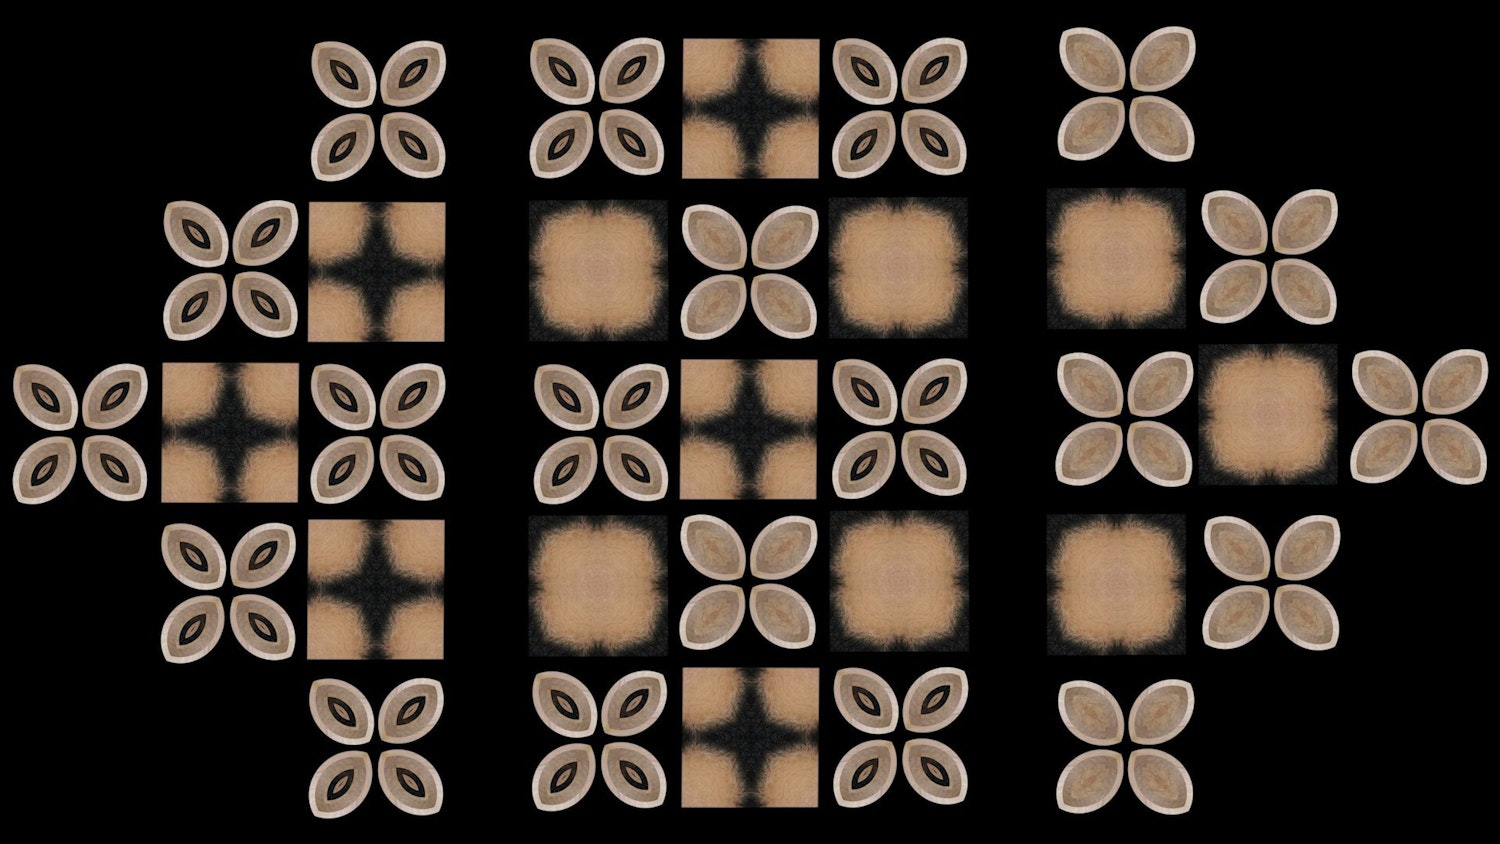 A video still from a work by Darcell Apelu showing a decorative pattern decorative pattern inspired by nature found in the South Pacific